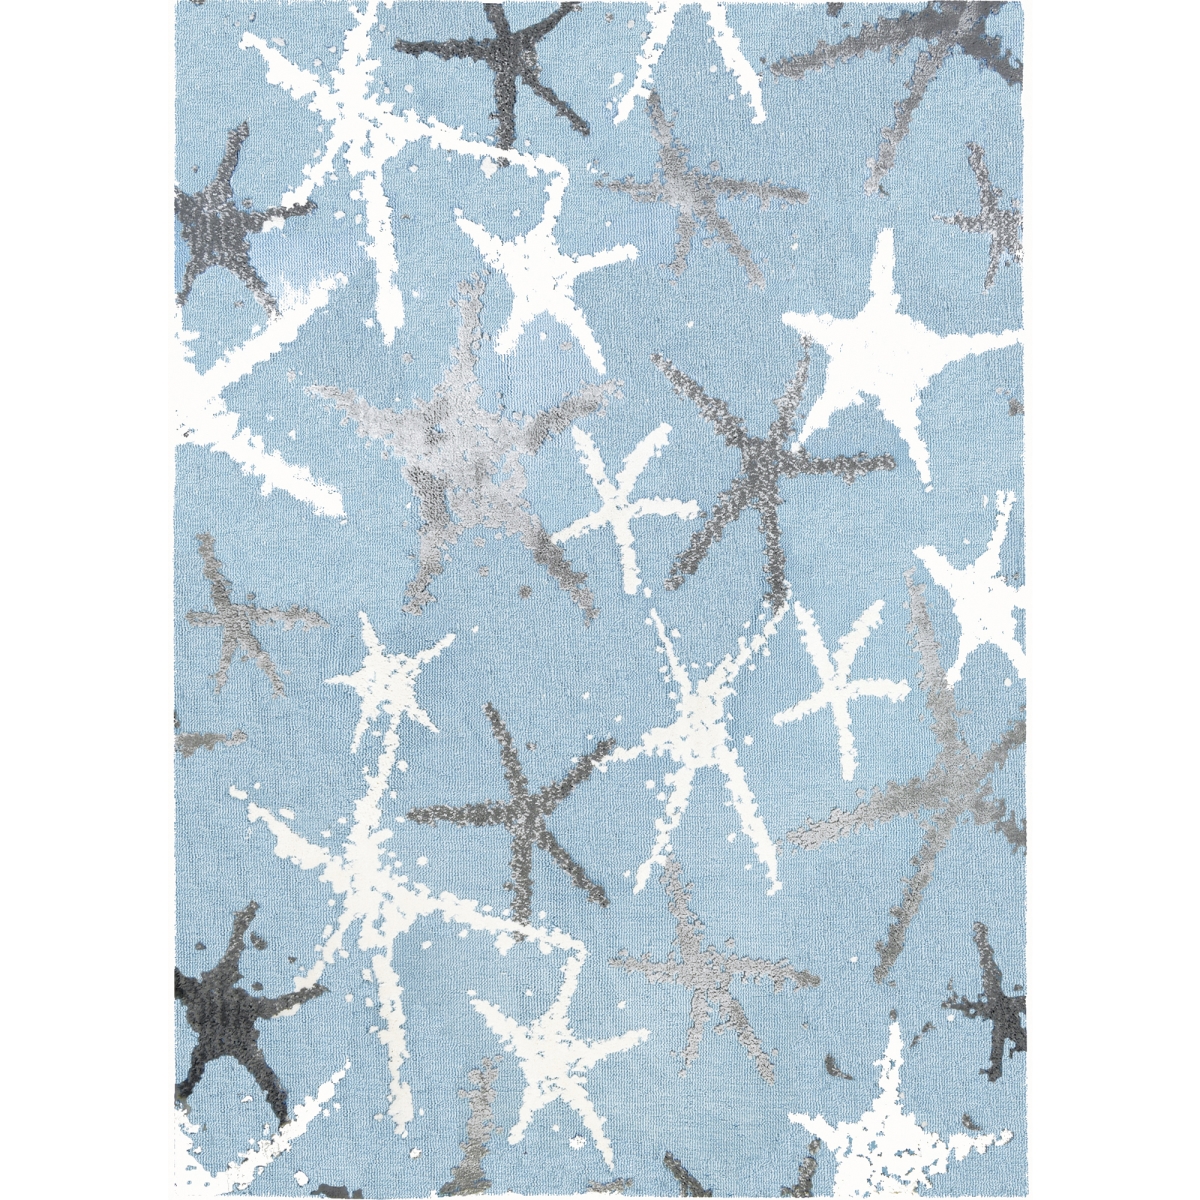 Pmf-kr001g 10 X 8 X 0.5 Ft. Tranquil Seas Indoor Area Rug, Multi Color